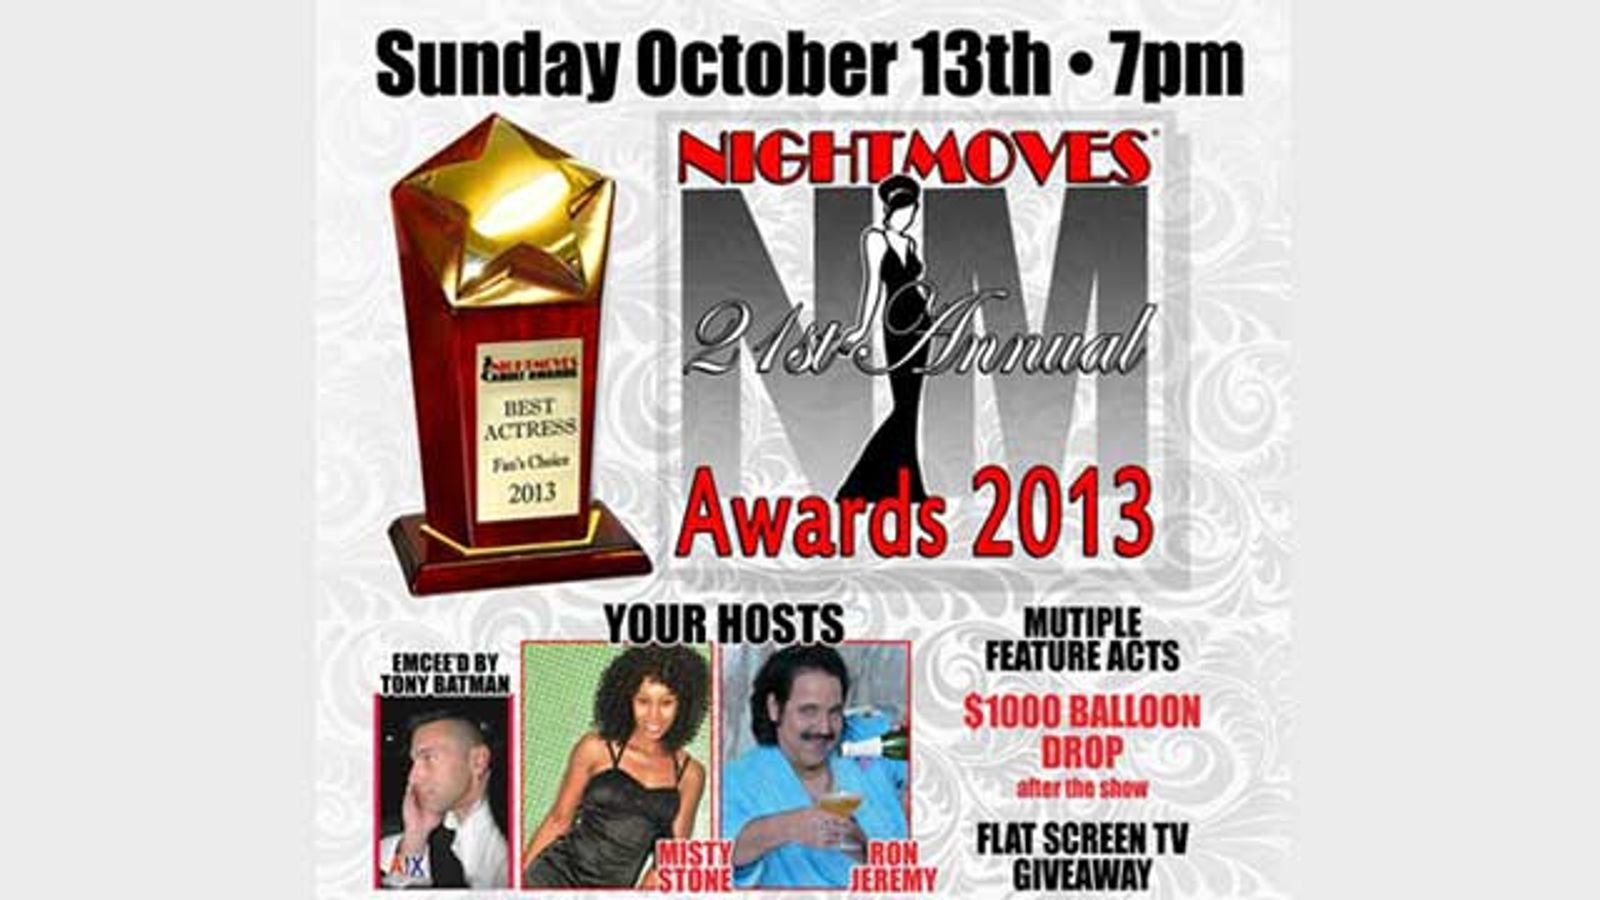 NightMoves Announces Hosts, Performances for 21st Annual Awards Show